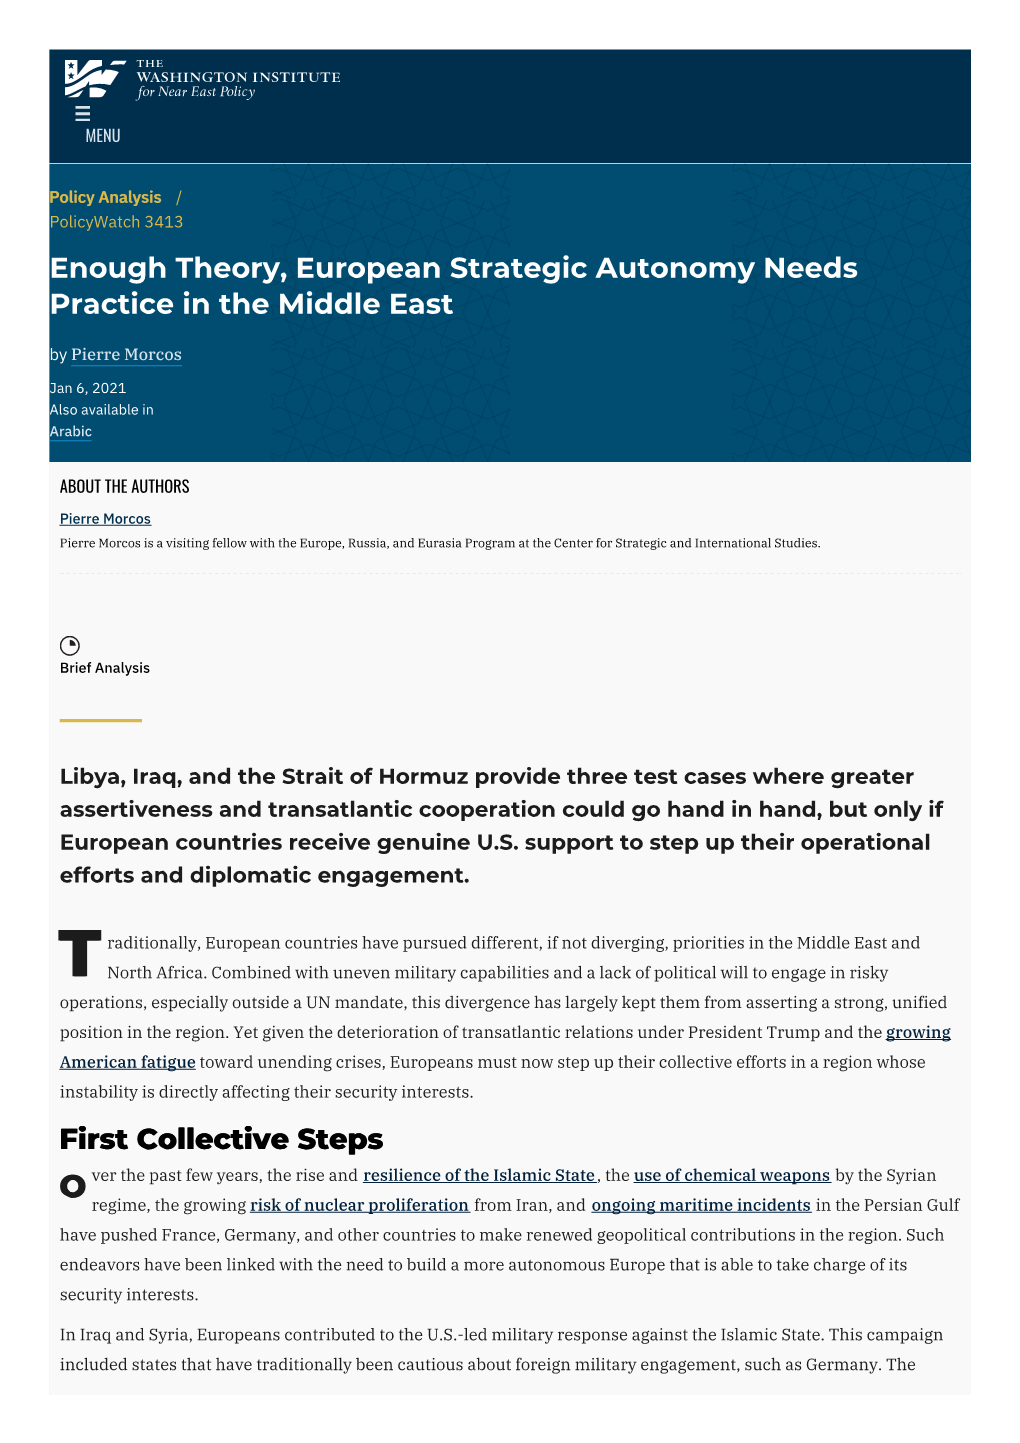 Enough Theory, European Strategic Autonomy Needs Practice in the Middle East by Pierre Morcos